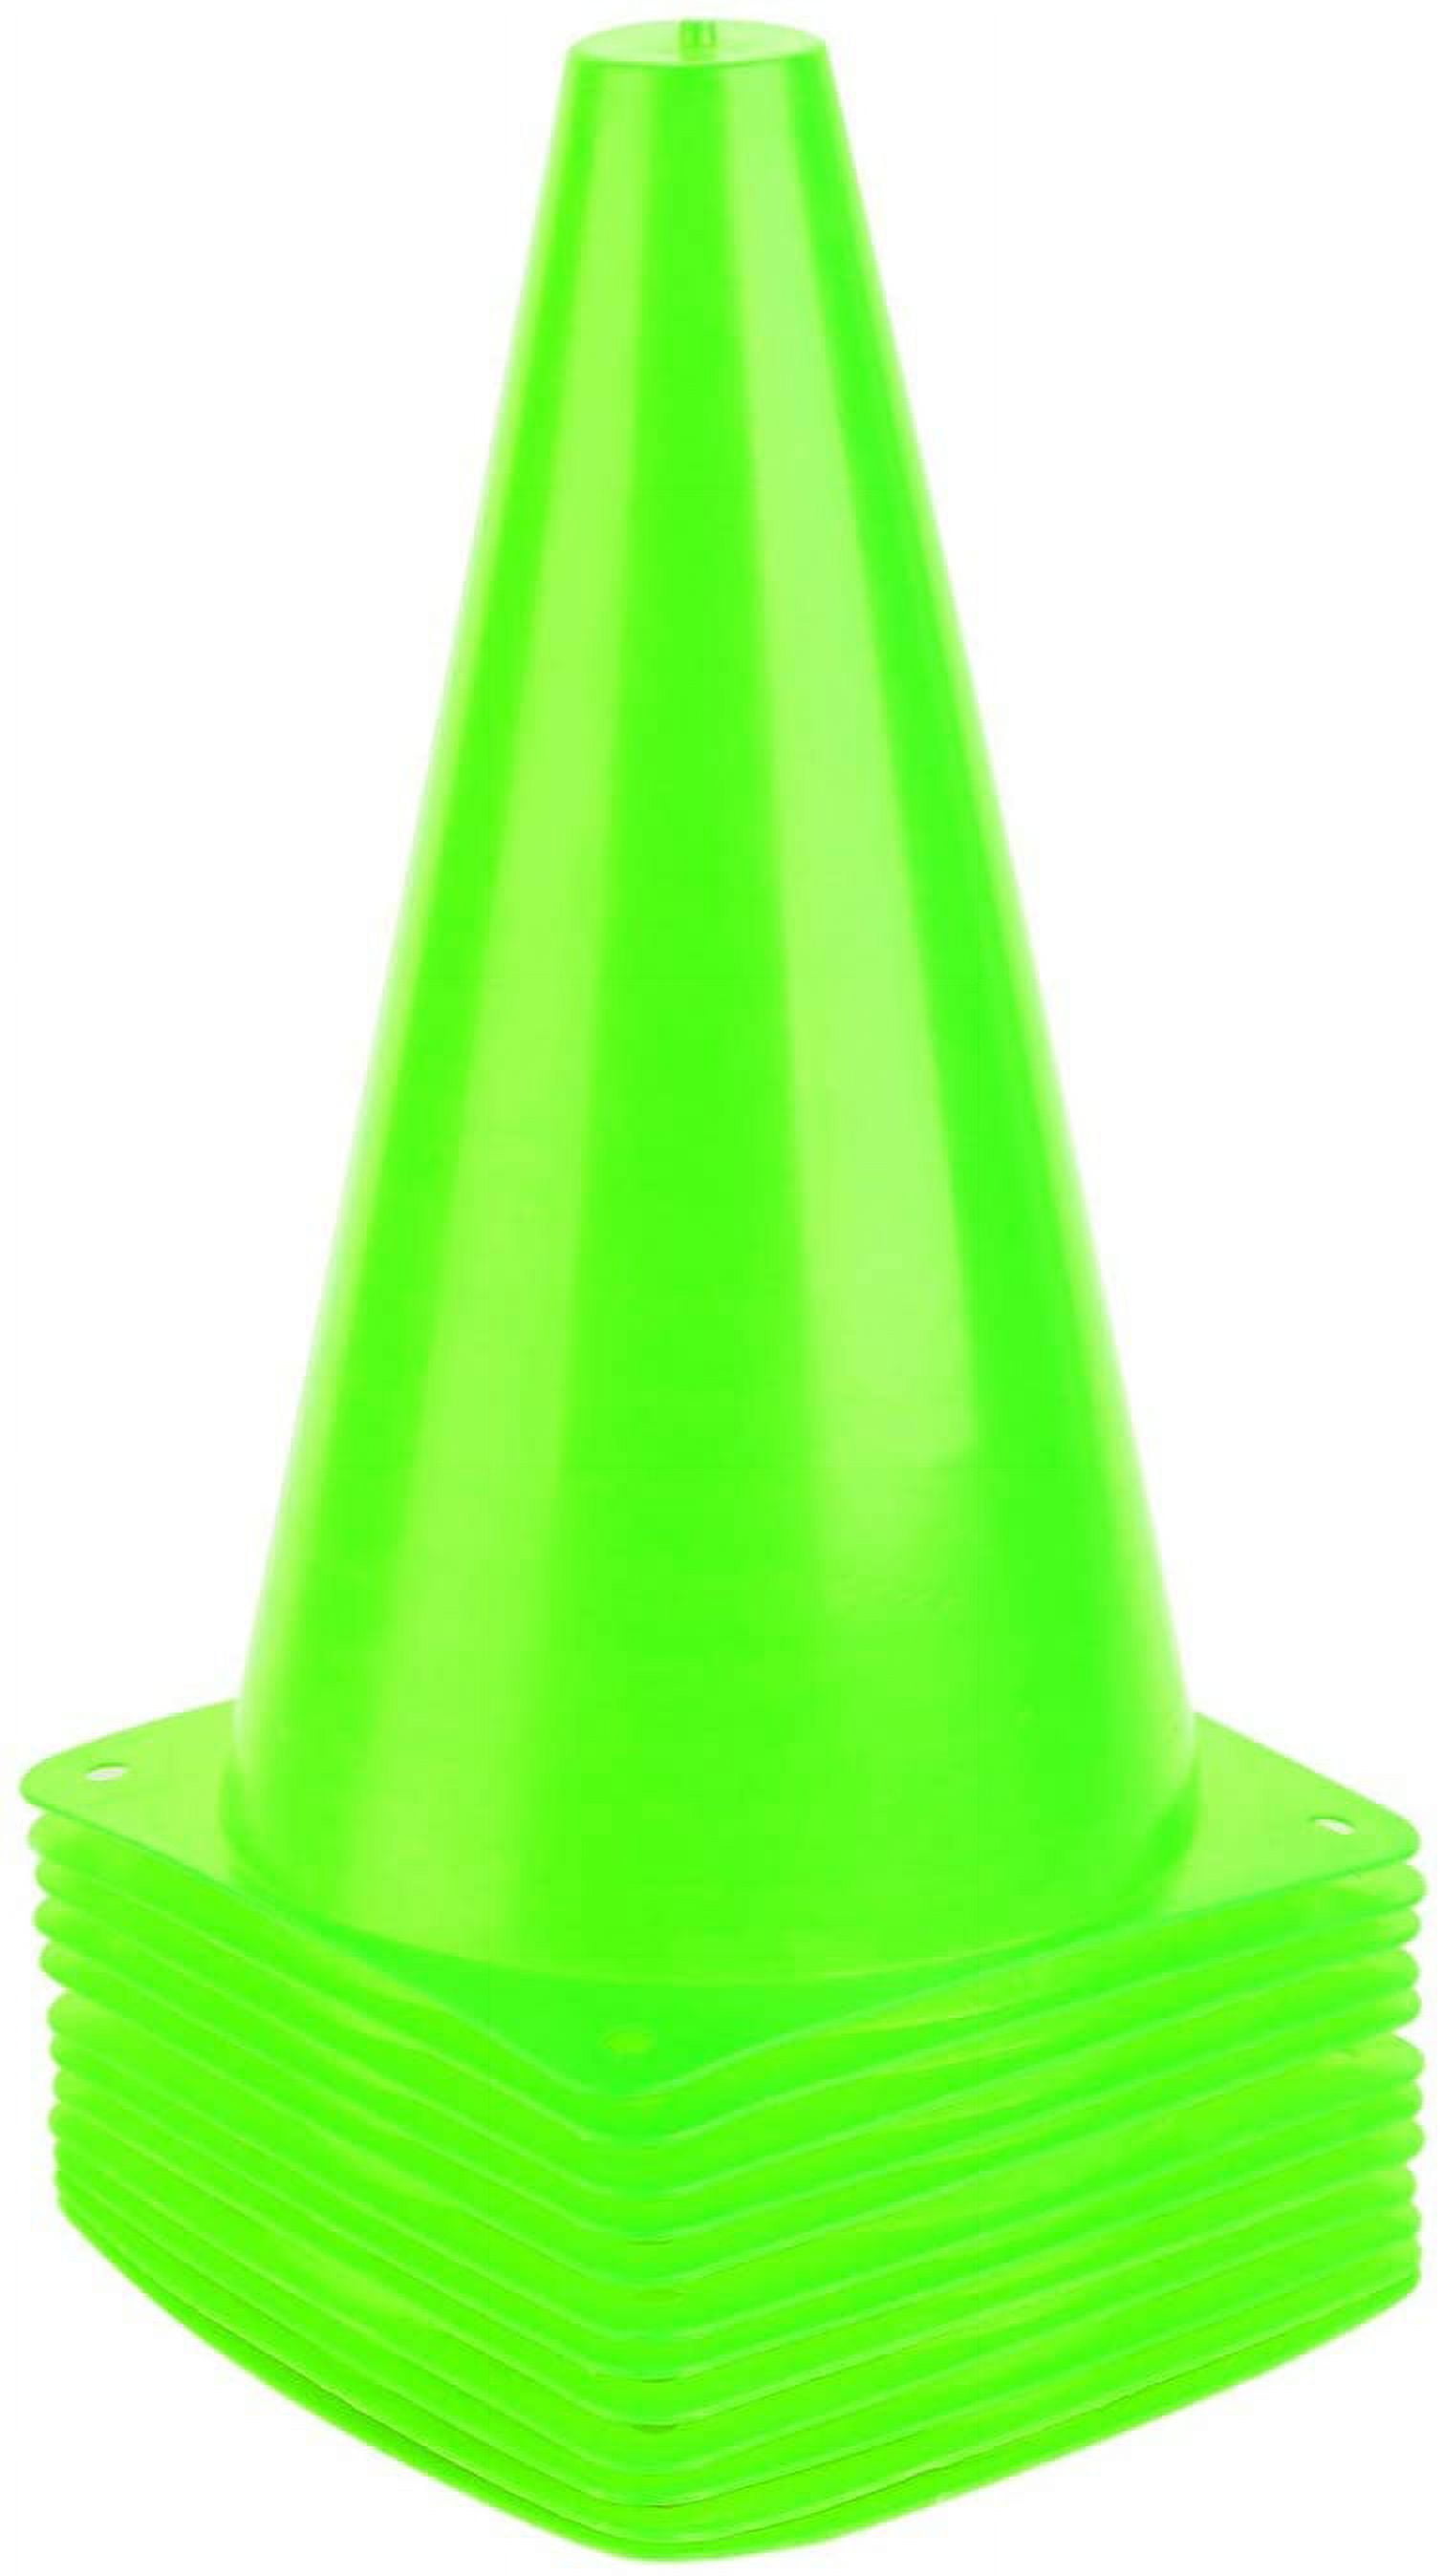 Prextex 40 Pack Soccer Cones with Holder for Training, Football, Kids,  Sports, Field Cone Markers, Birthday Party Outdoor Games Supplies